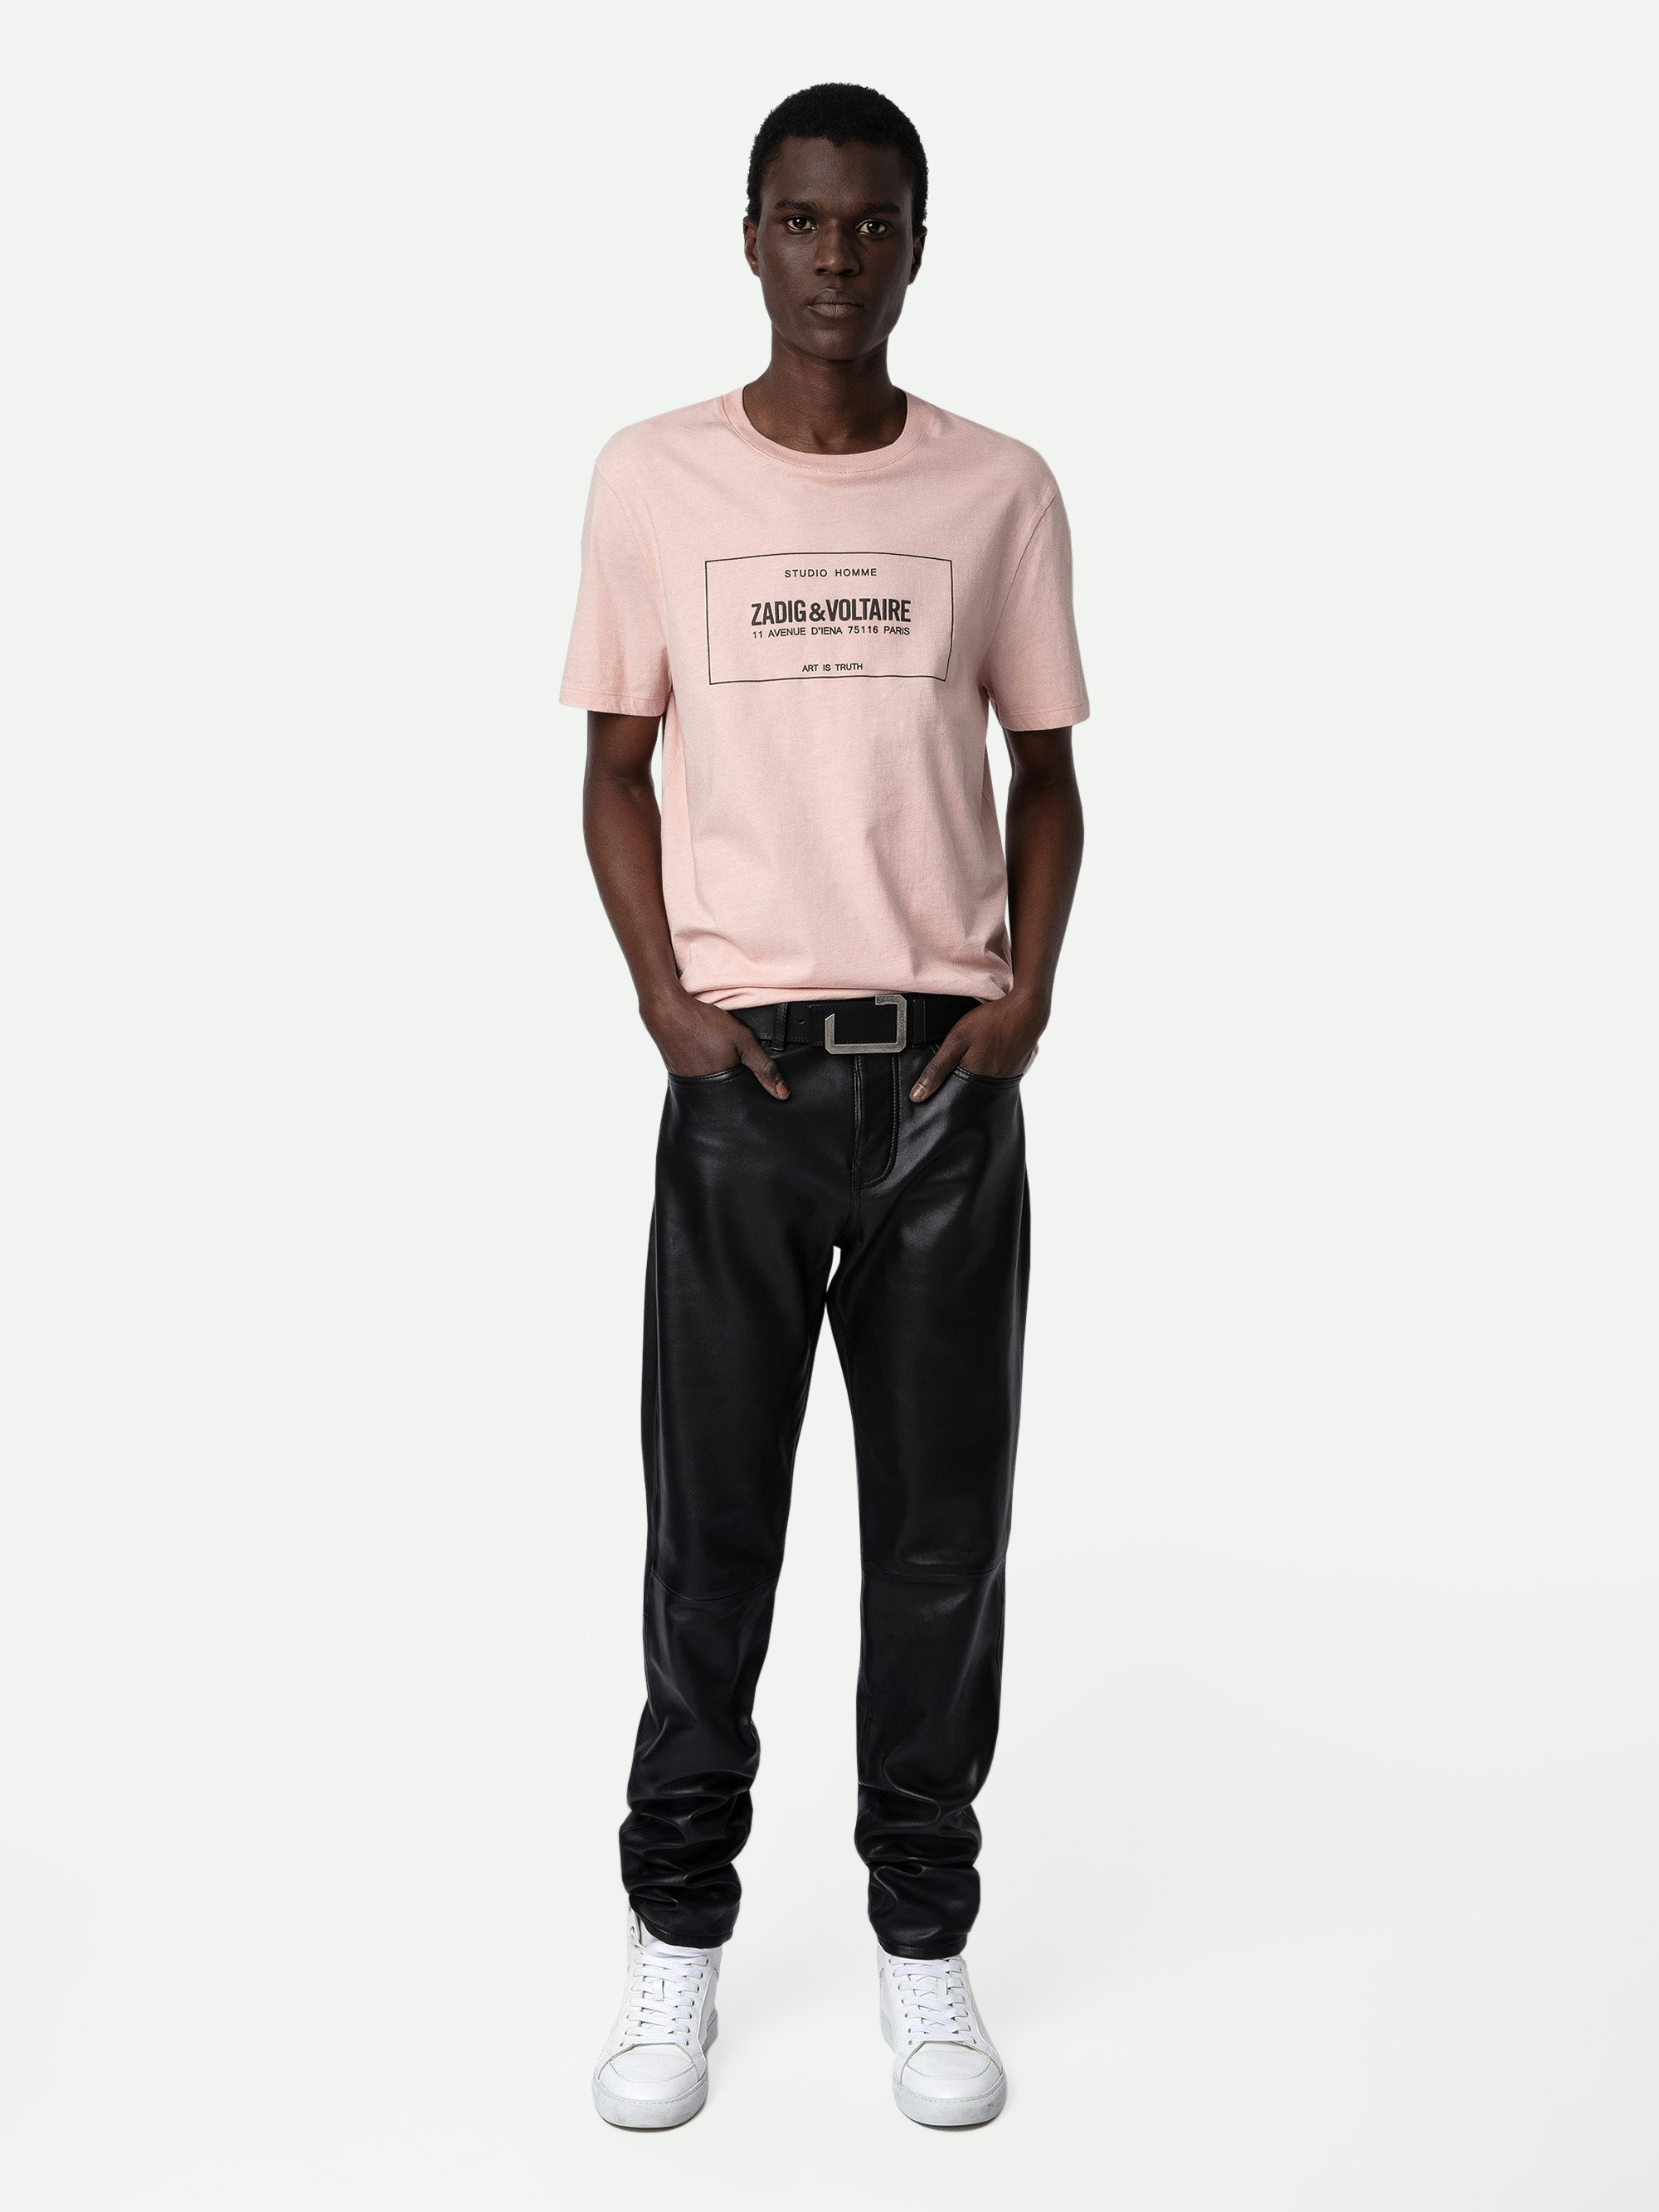 Ted Insignia T-shirt - Pink organic cotton T-shirt with insignia.